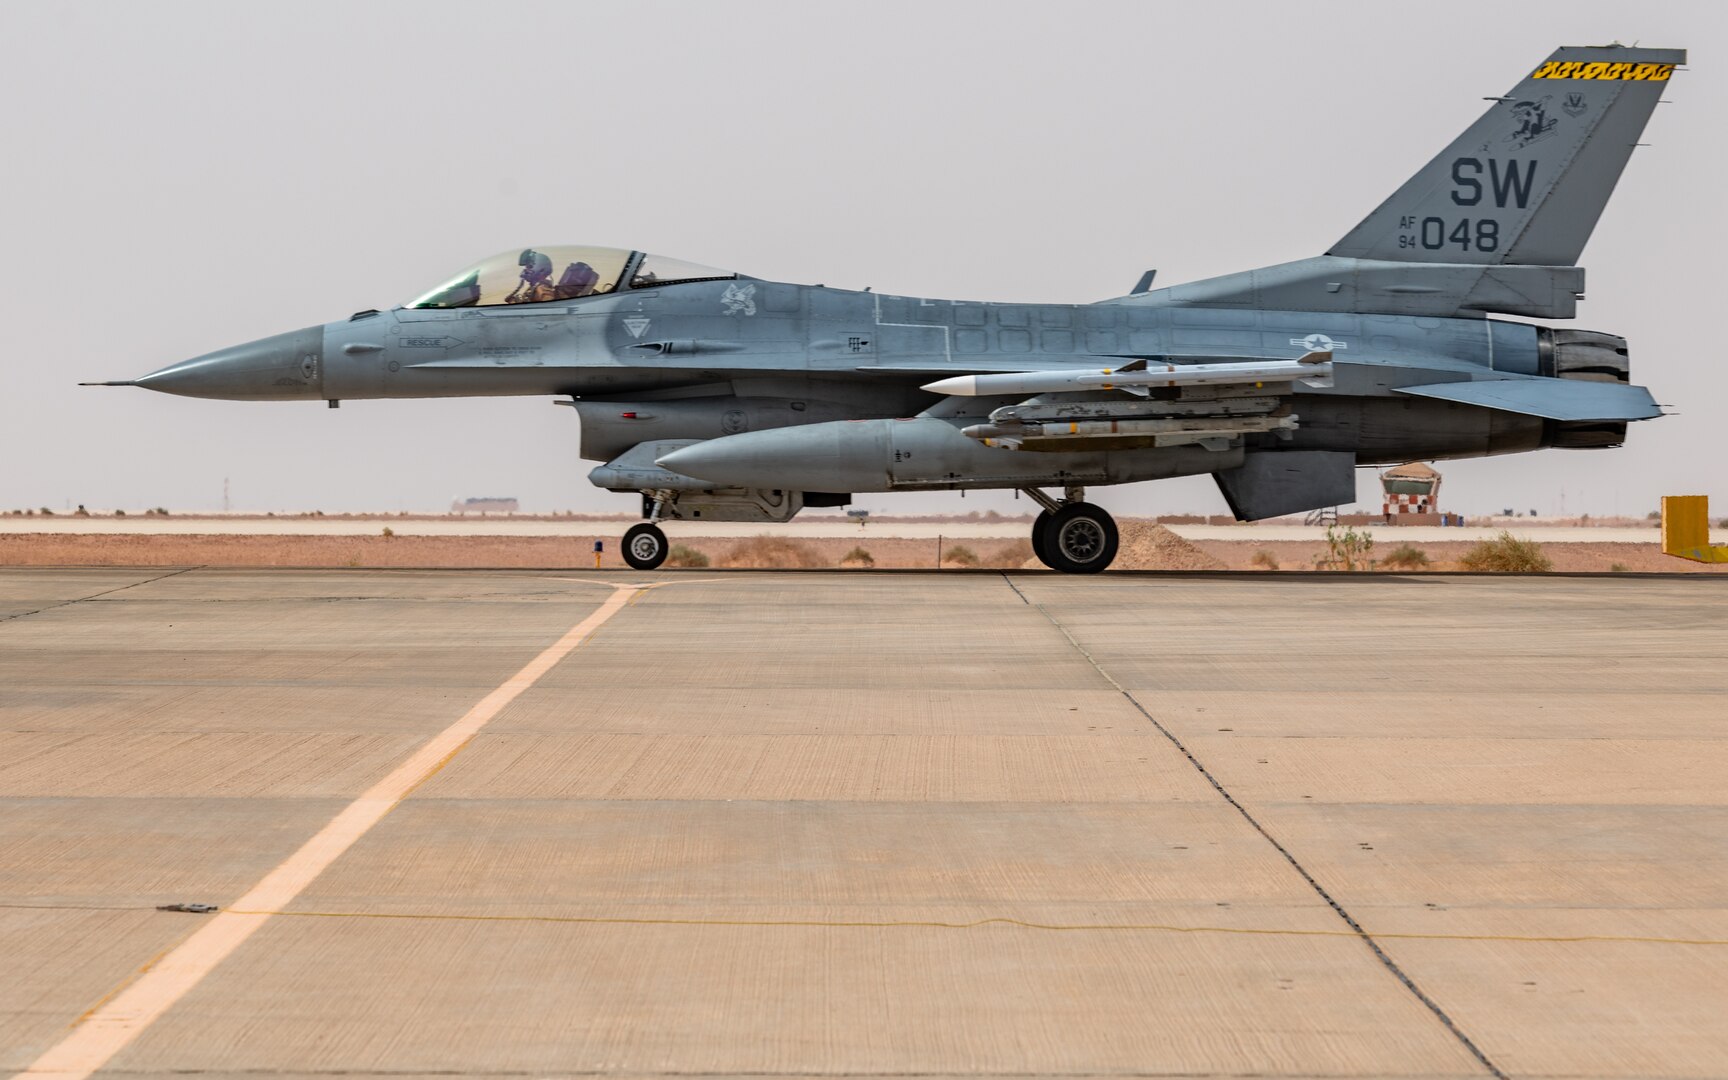 A U.S. Air Force F-16CJ Fighting Falcon, assigned to the 79th Expeditionary Fighter Squadron, taxis after landing on Prince Sultan Air Base, Kingdom of Saudi Arabia, July 26, 2022. The 378th Expeditionary Operation Support Squadron’s Airfield Management flight is responsible for checking the airfield for discrepancies that’d prevent aircraft from efficiently arriving and departing safely and effectively from PSAB. (U.S. Air Force photo by Staff Sgt. Noah J. Tancer)